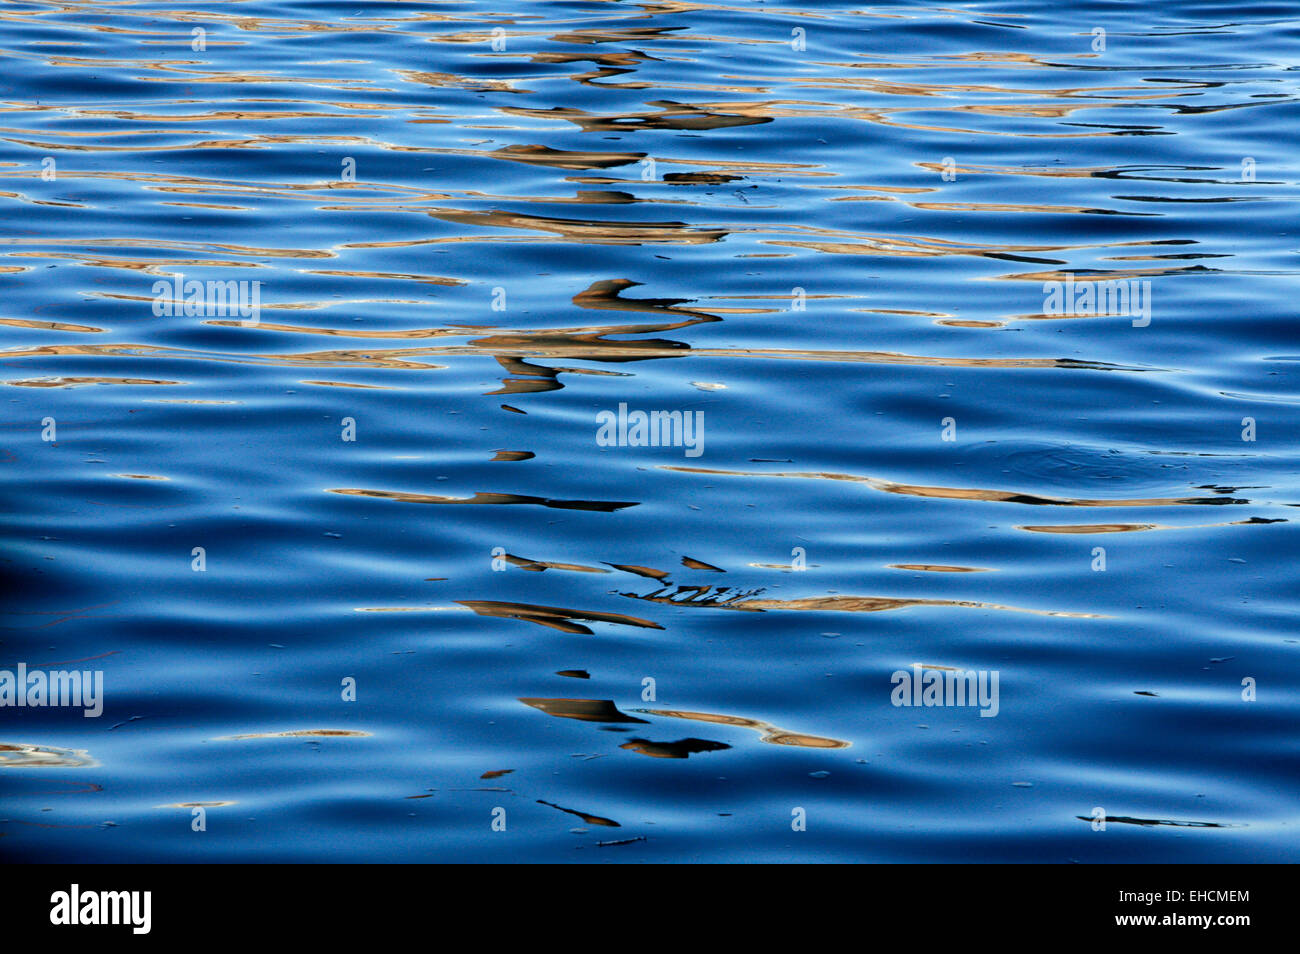 Ripples in the River Thames reflecting the Lots Road Power Station, Sands End, London, UK Stock Photo